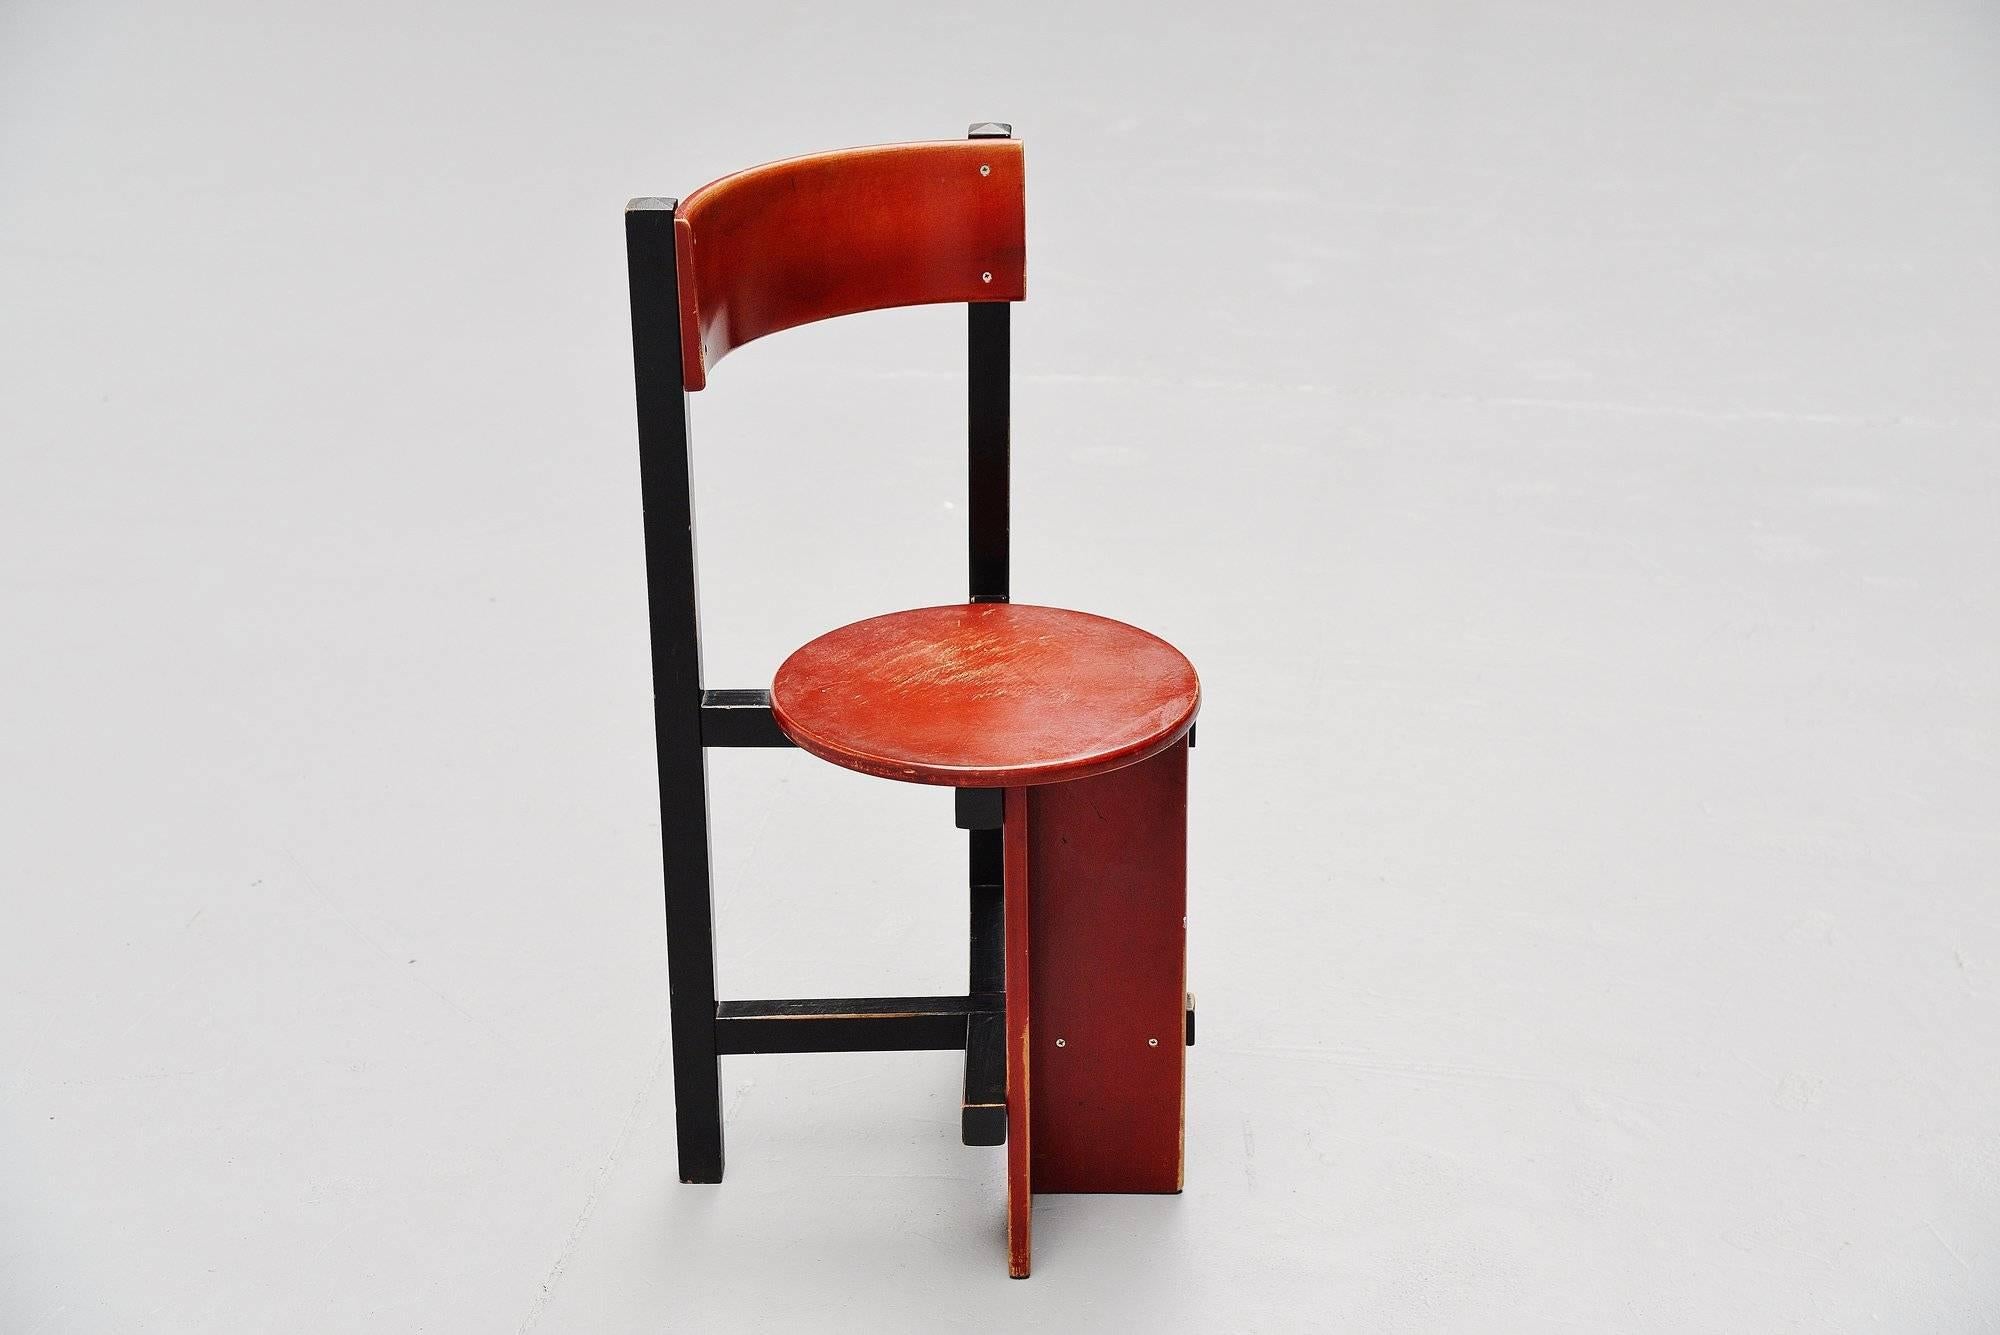 Cold-Painted Piet Blom Bastille Chair for Twente Institute of Technology, 1964